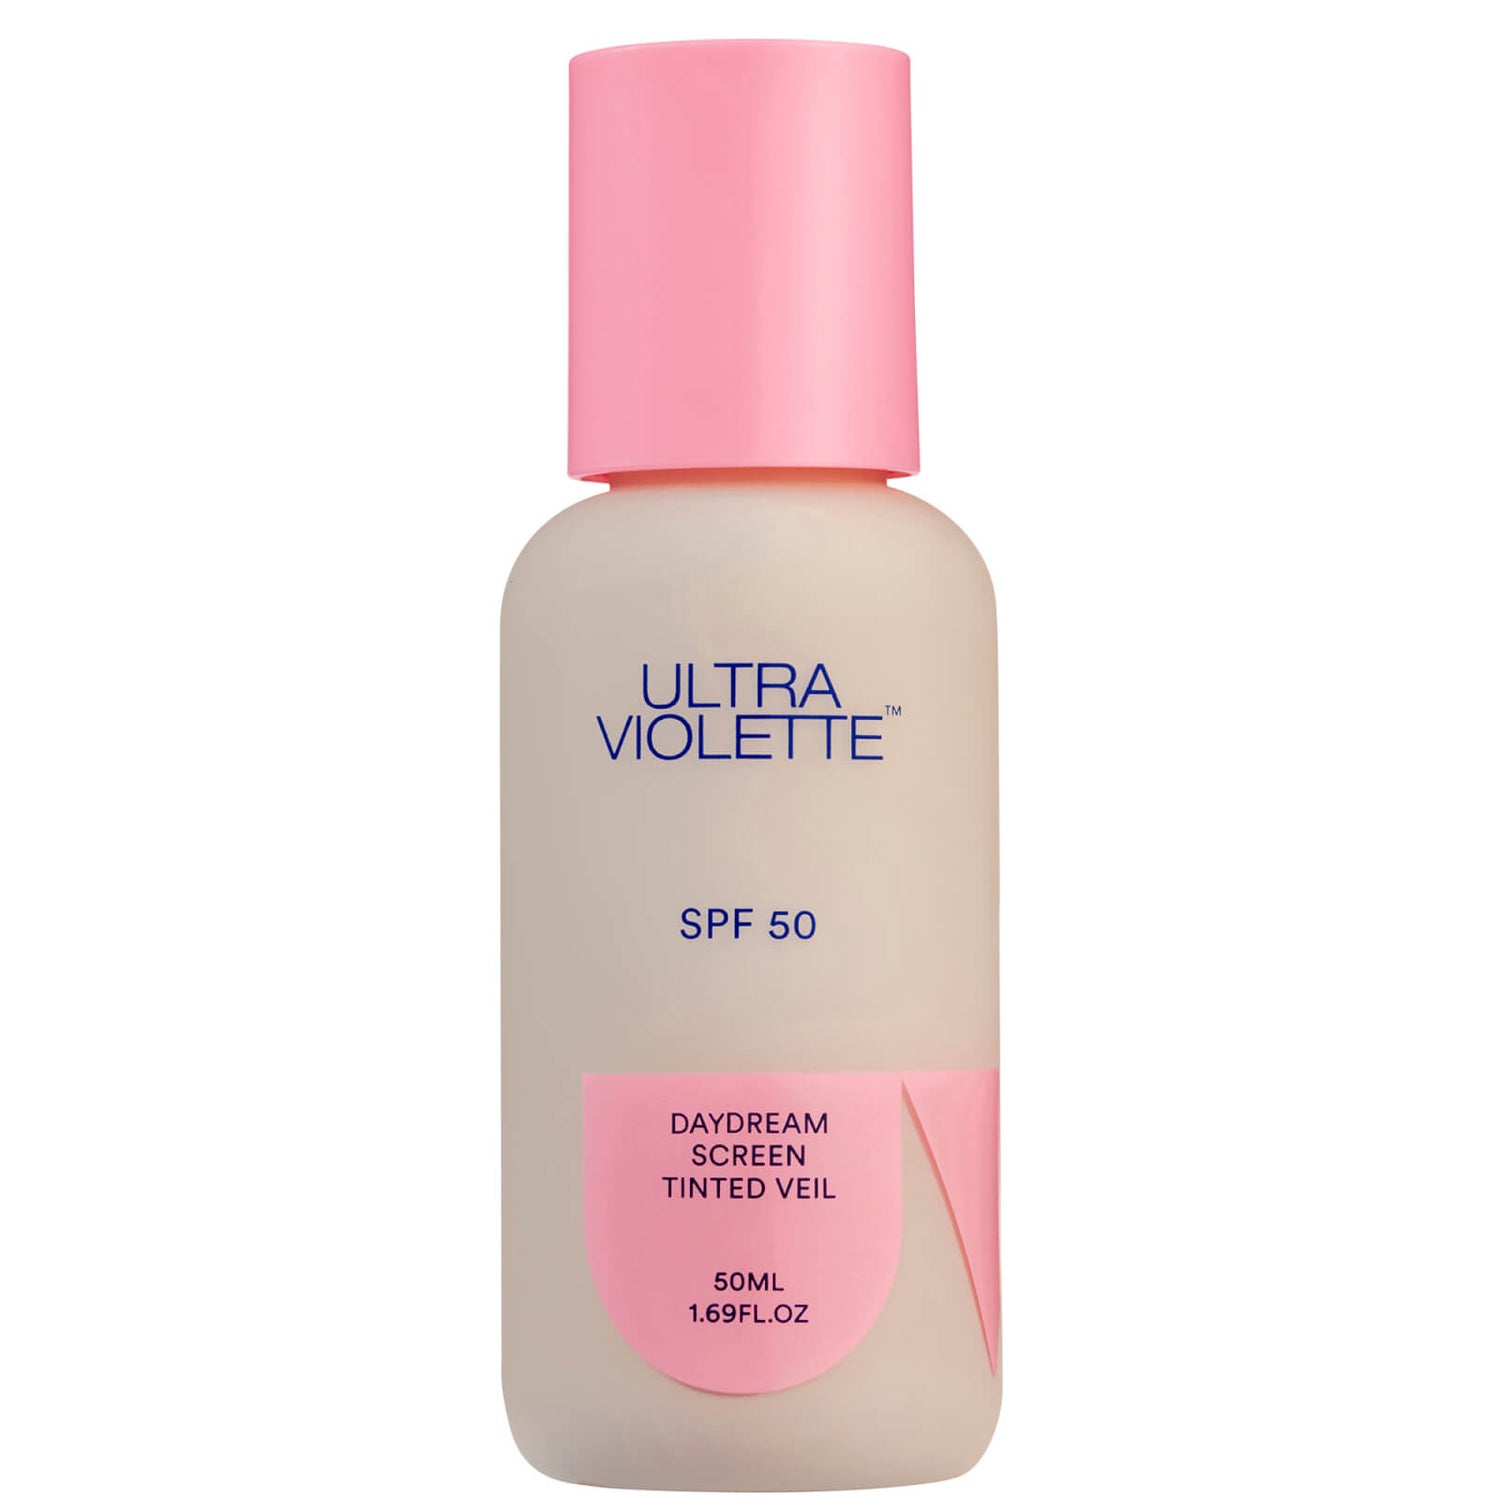 Ultra Violette Daydream Screen SPF50 Tinted Veil 50ml (Various Shades)